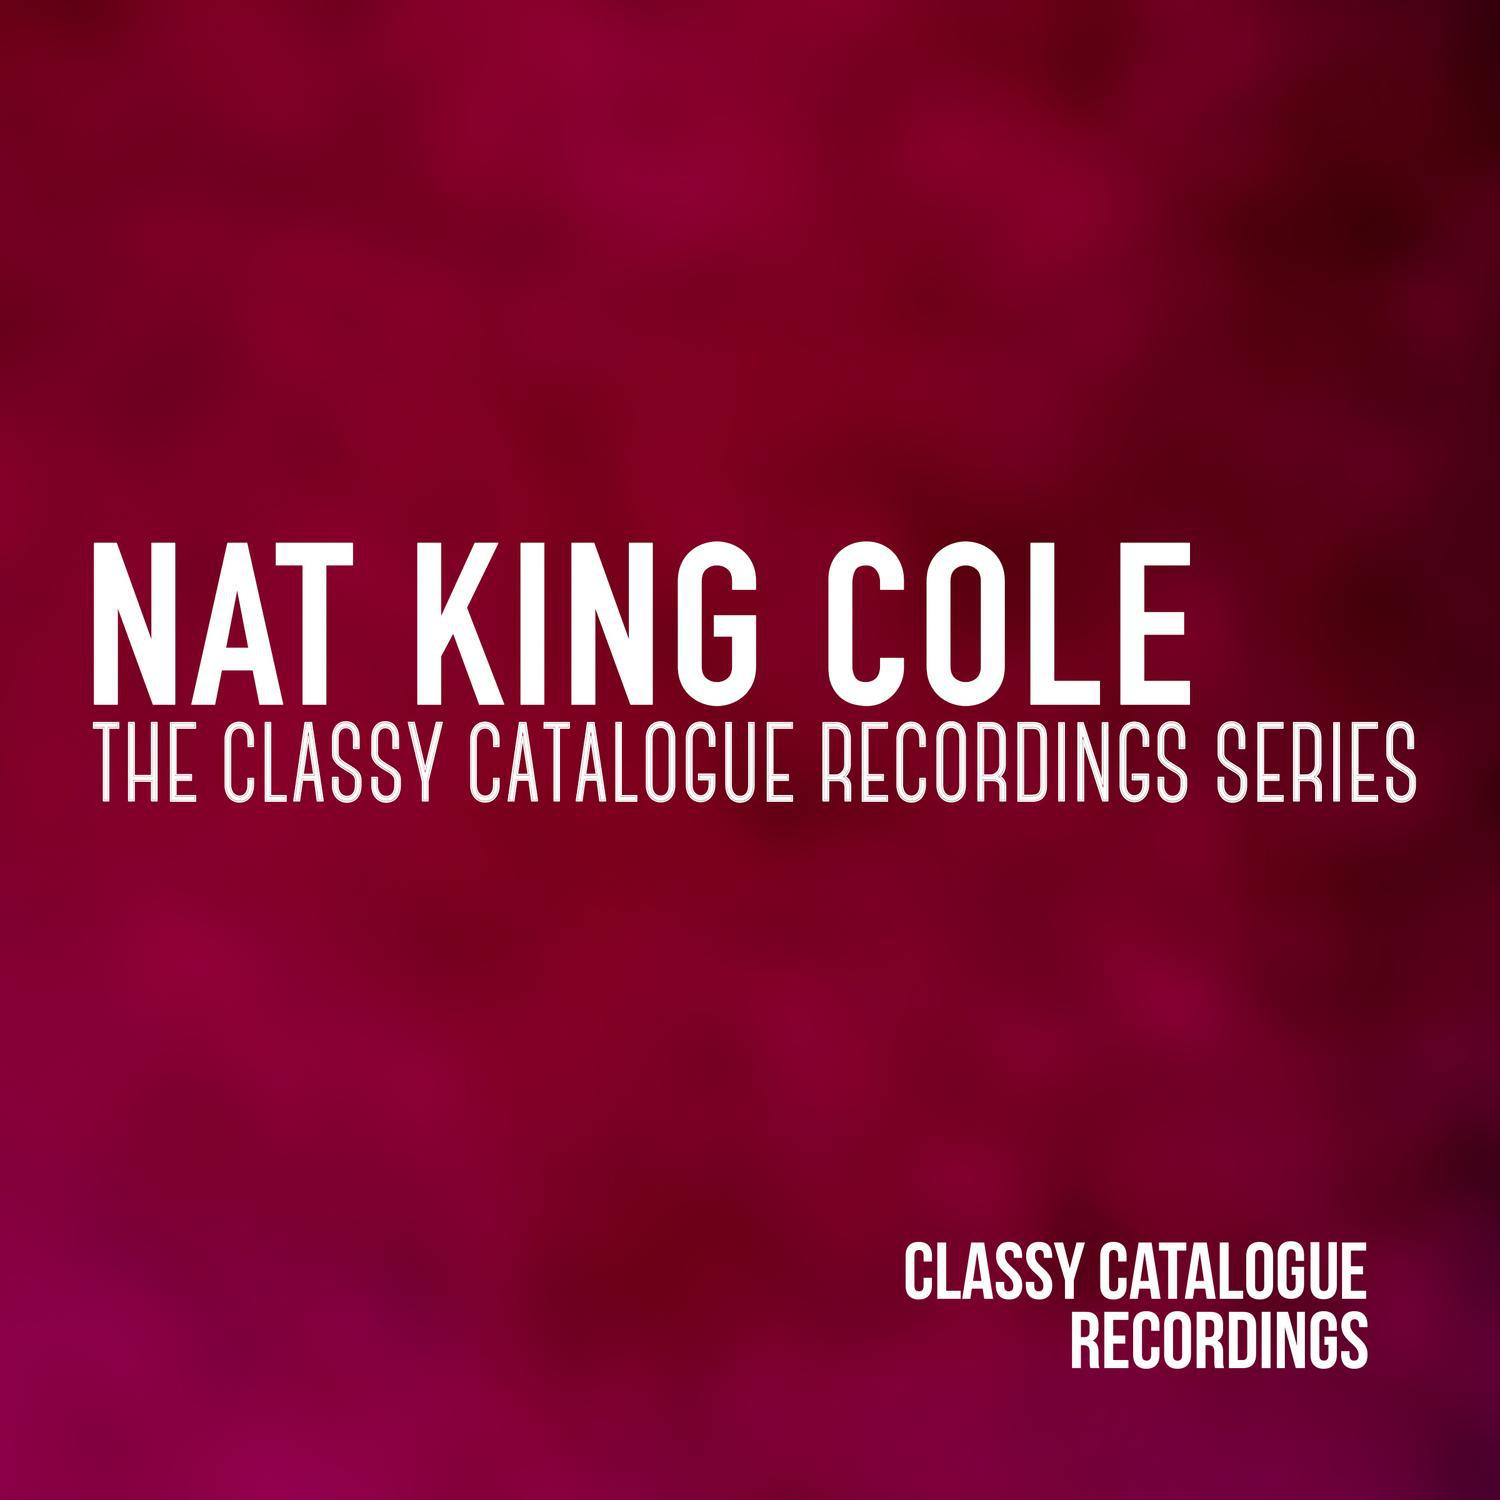 Nat King Cole - The Classy Catalogue Recordings Series